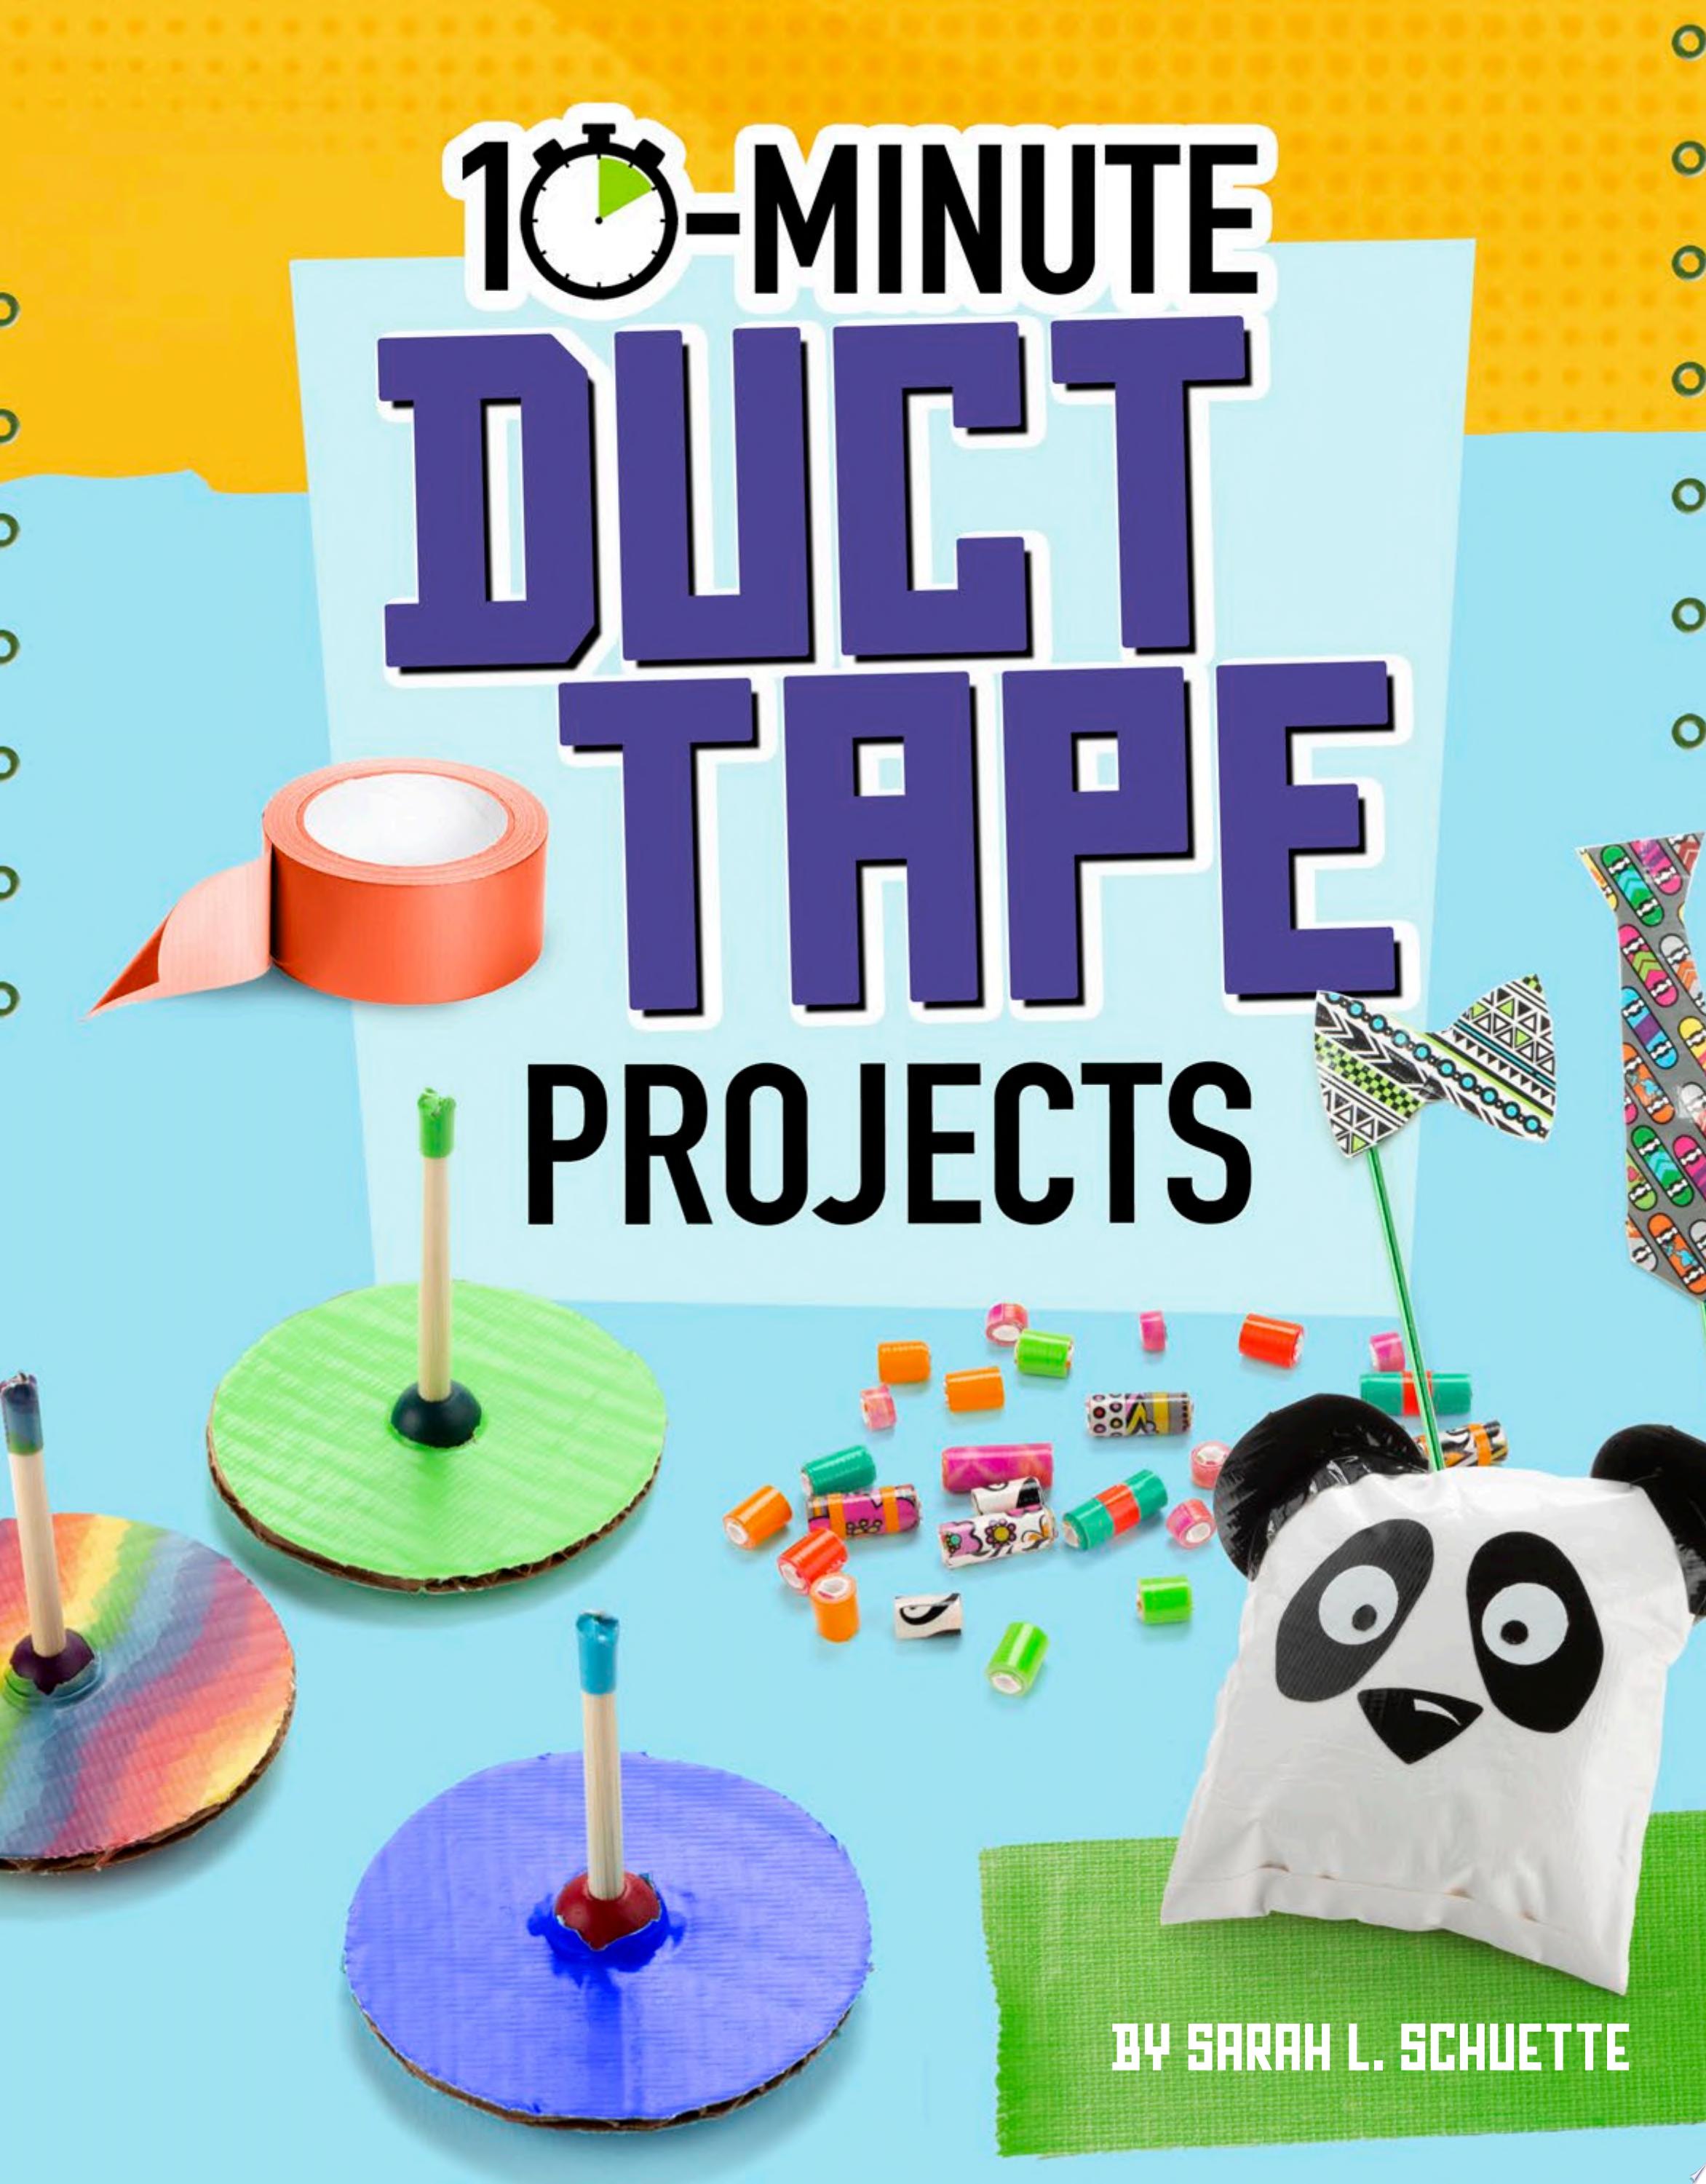 Image for "10-Minute Duct Tape Projects"